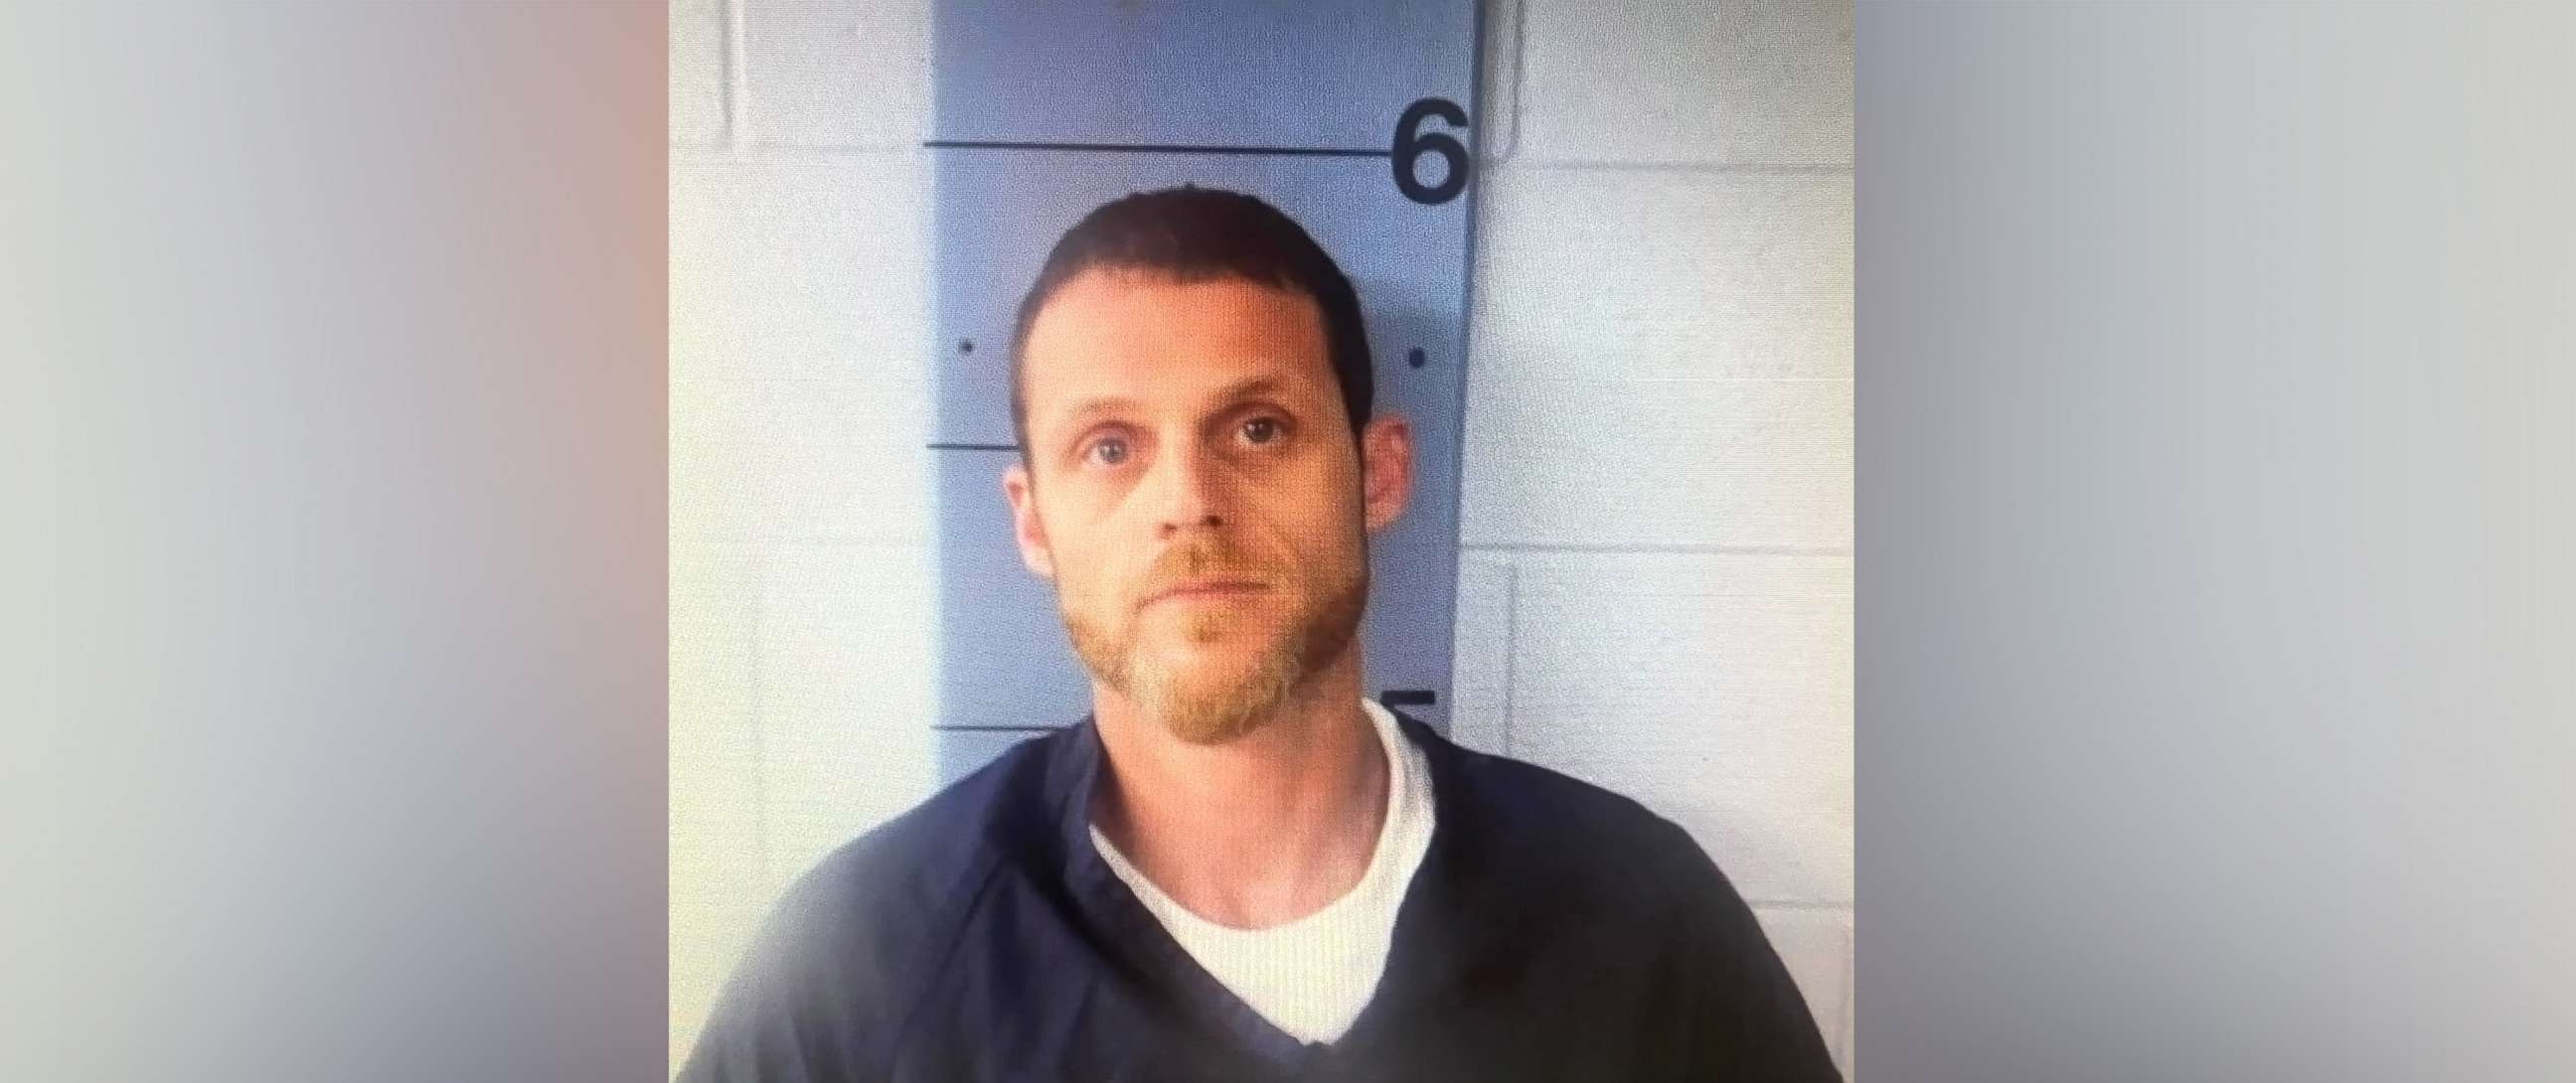 PHOTO: Christopher Blevins, an escaped inmate from Barry County Jail in Cassville, Missouri, is pictured in an image released by law enforcements.